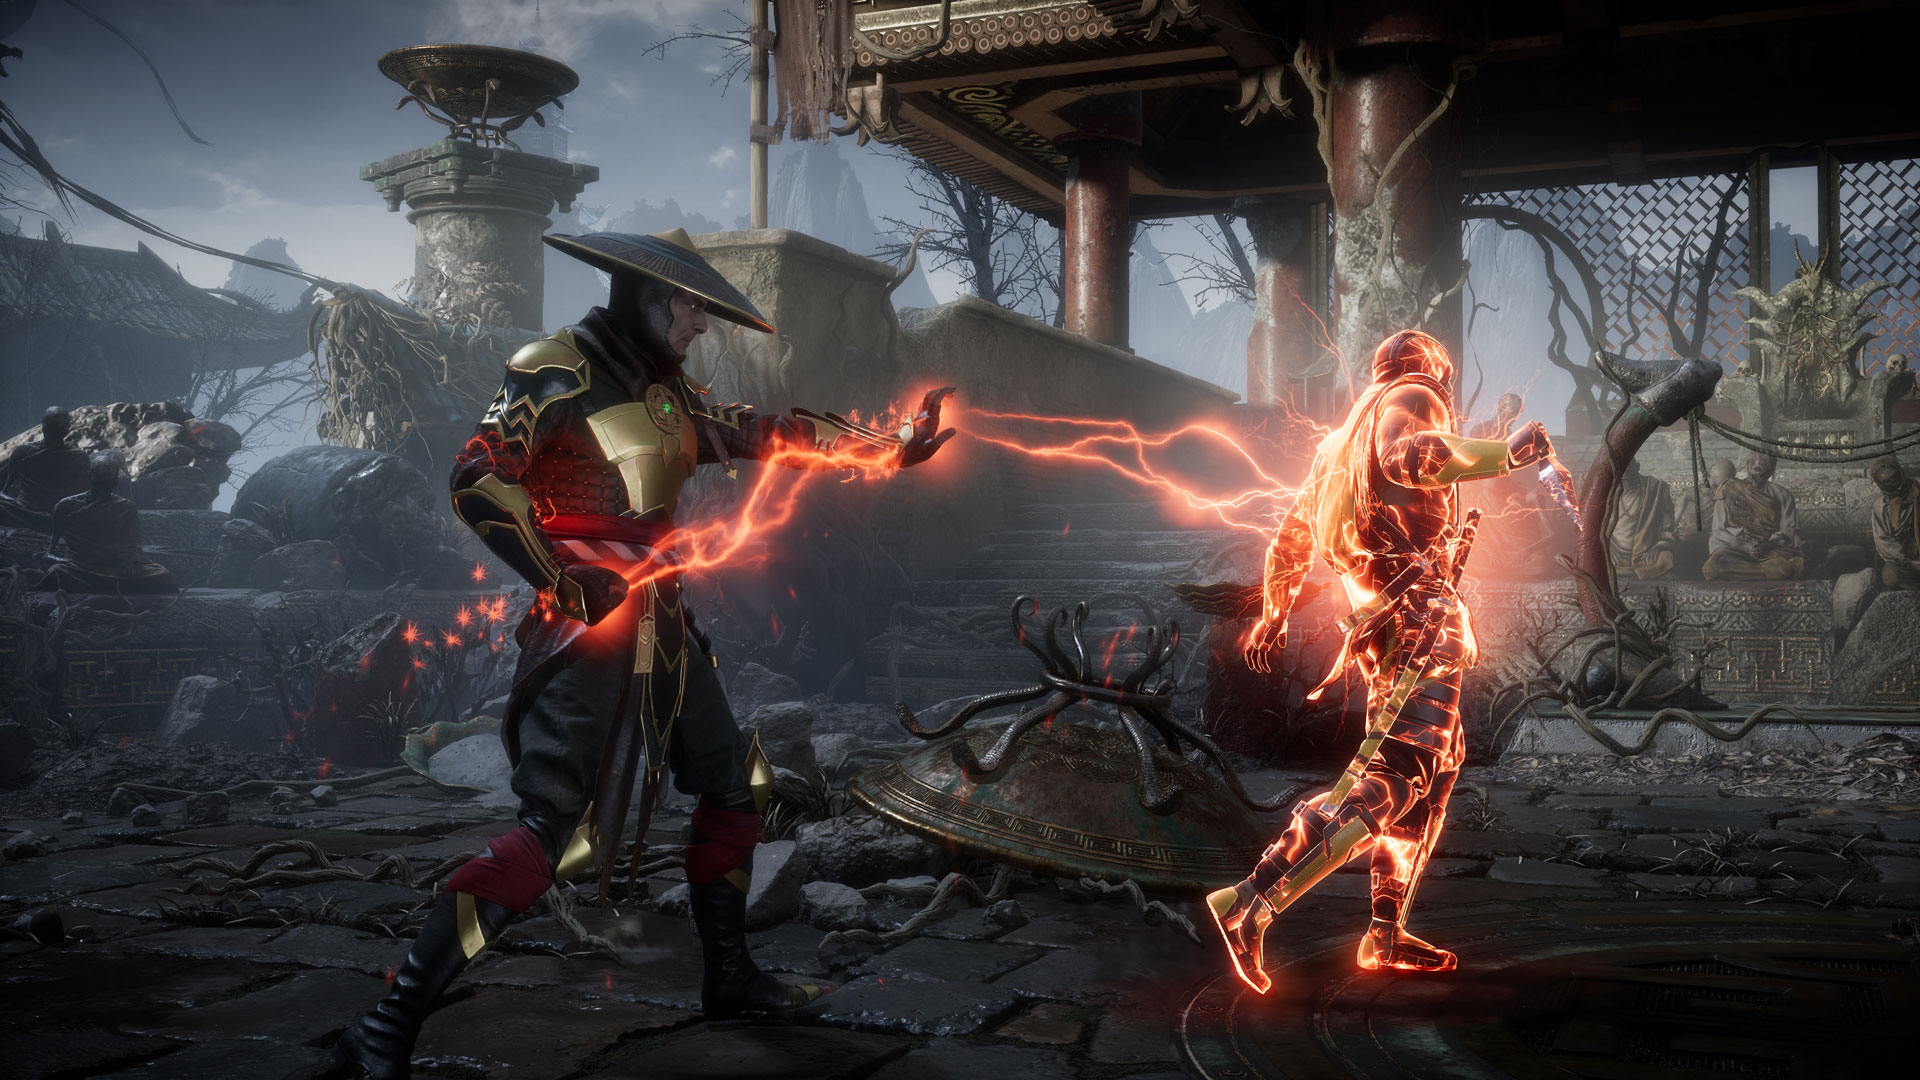 Mortal Kombat 11 reveals first look at gameplay, extremely gory Fatalities  - The AU Review